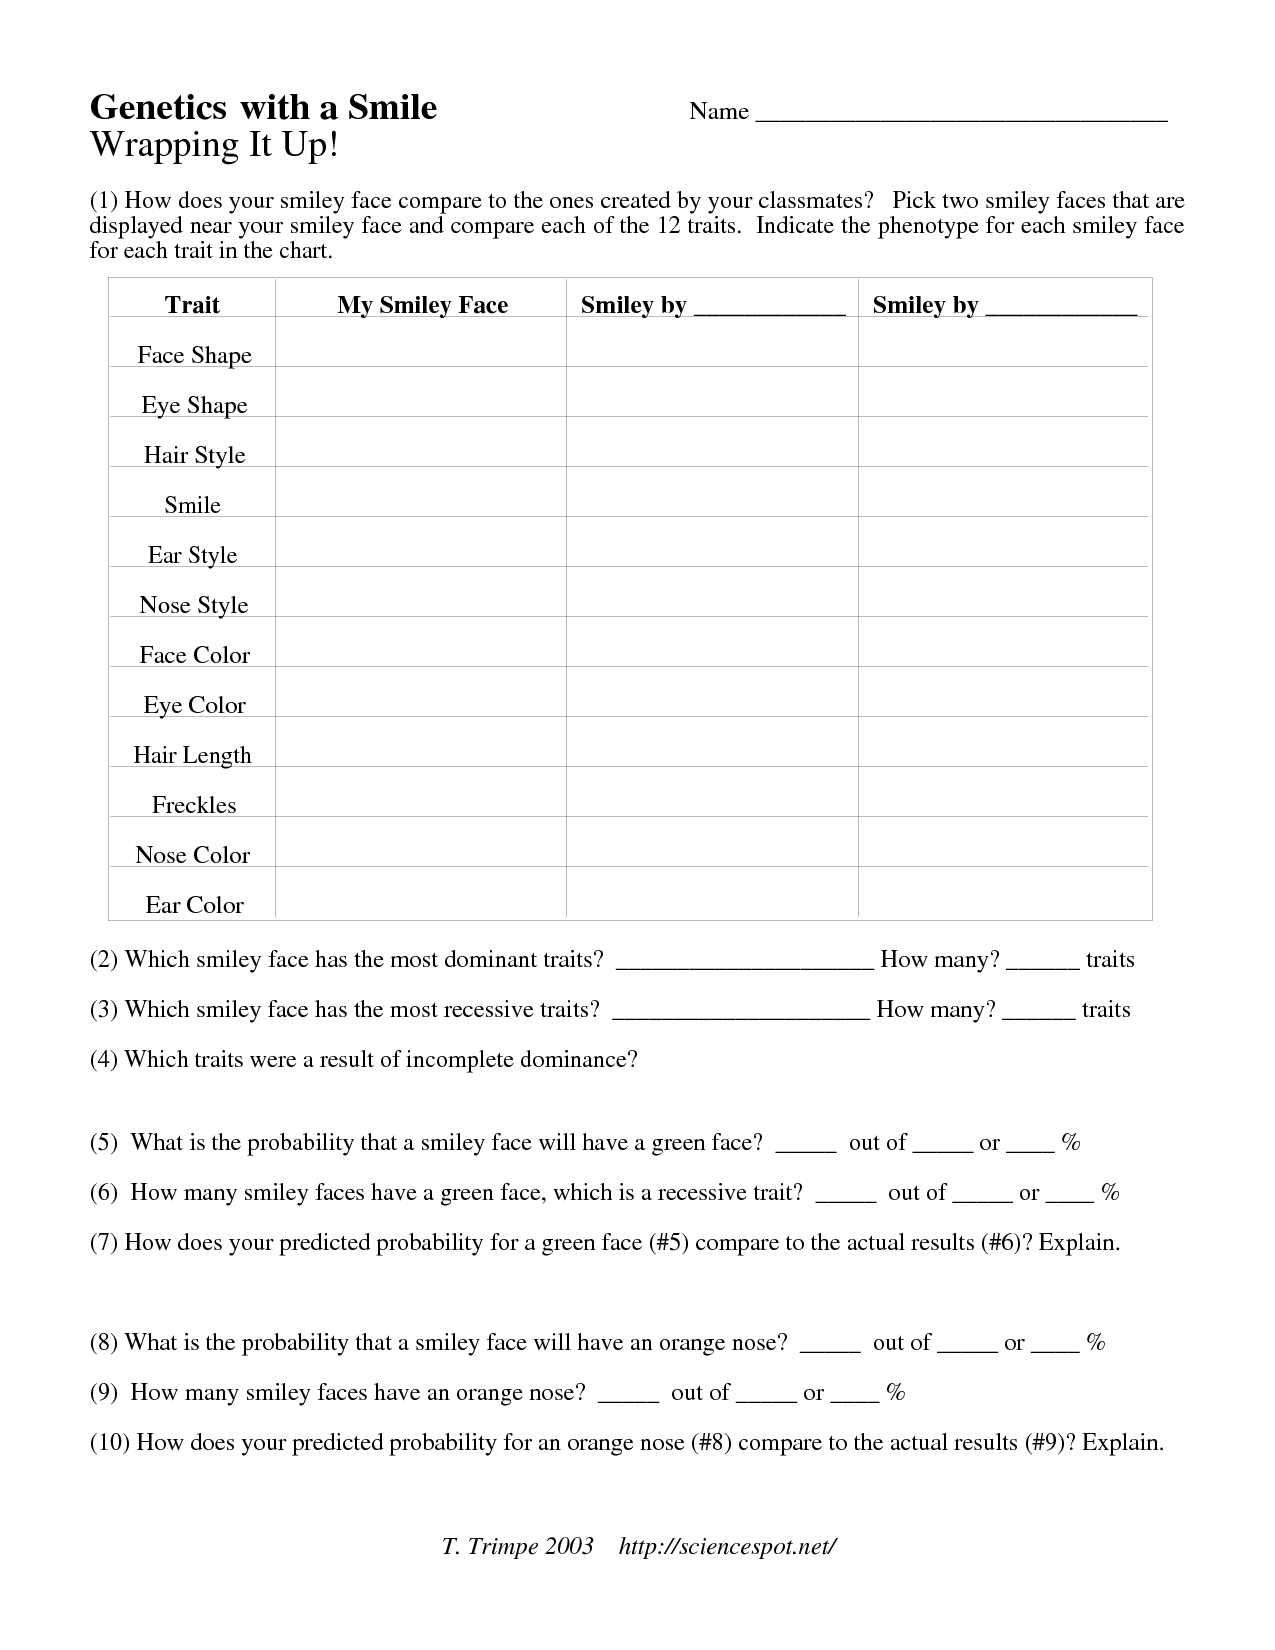 Genetics with a Smile Answers Worksheet